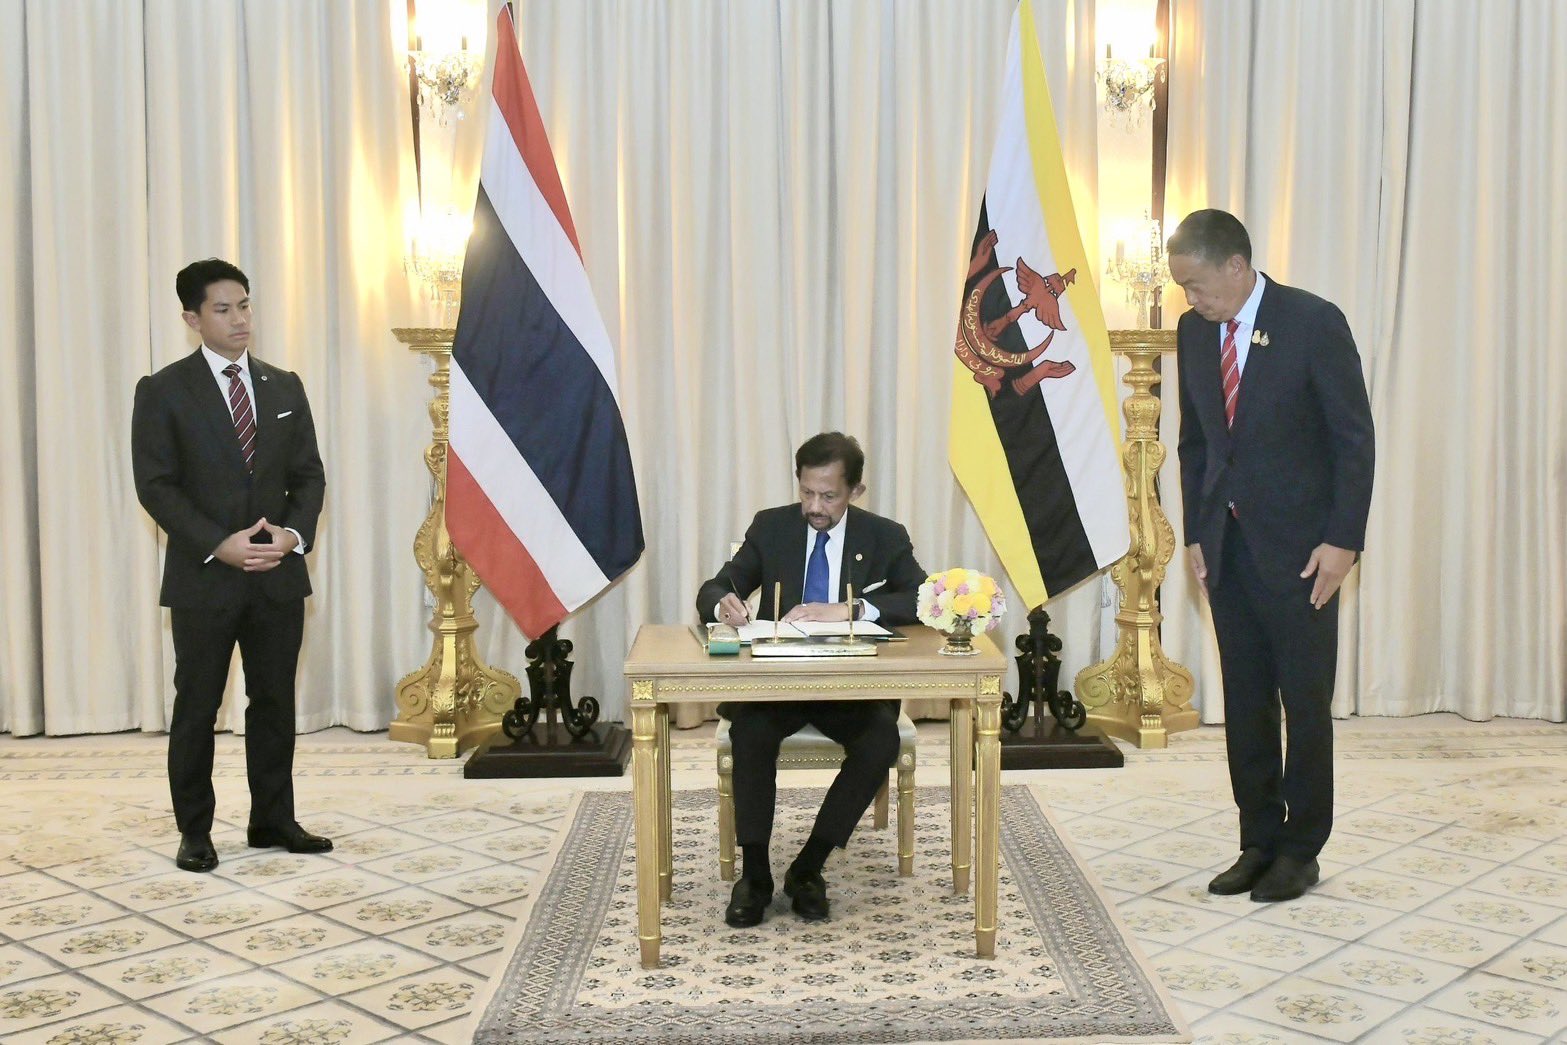 Key Points from Discussions between the Prime Minister of Thailand and the Sultan of Brunei Darussalam